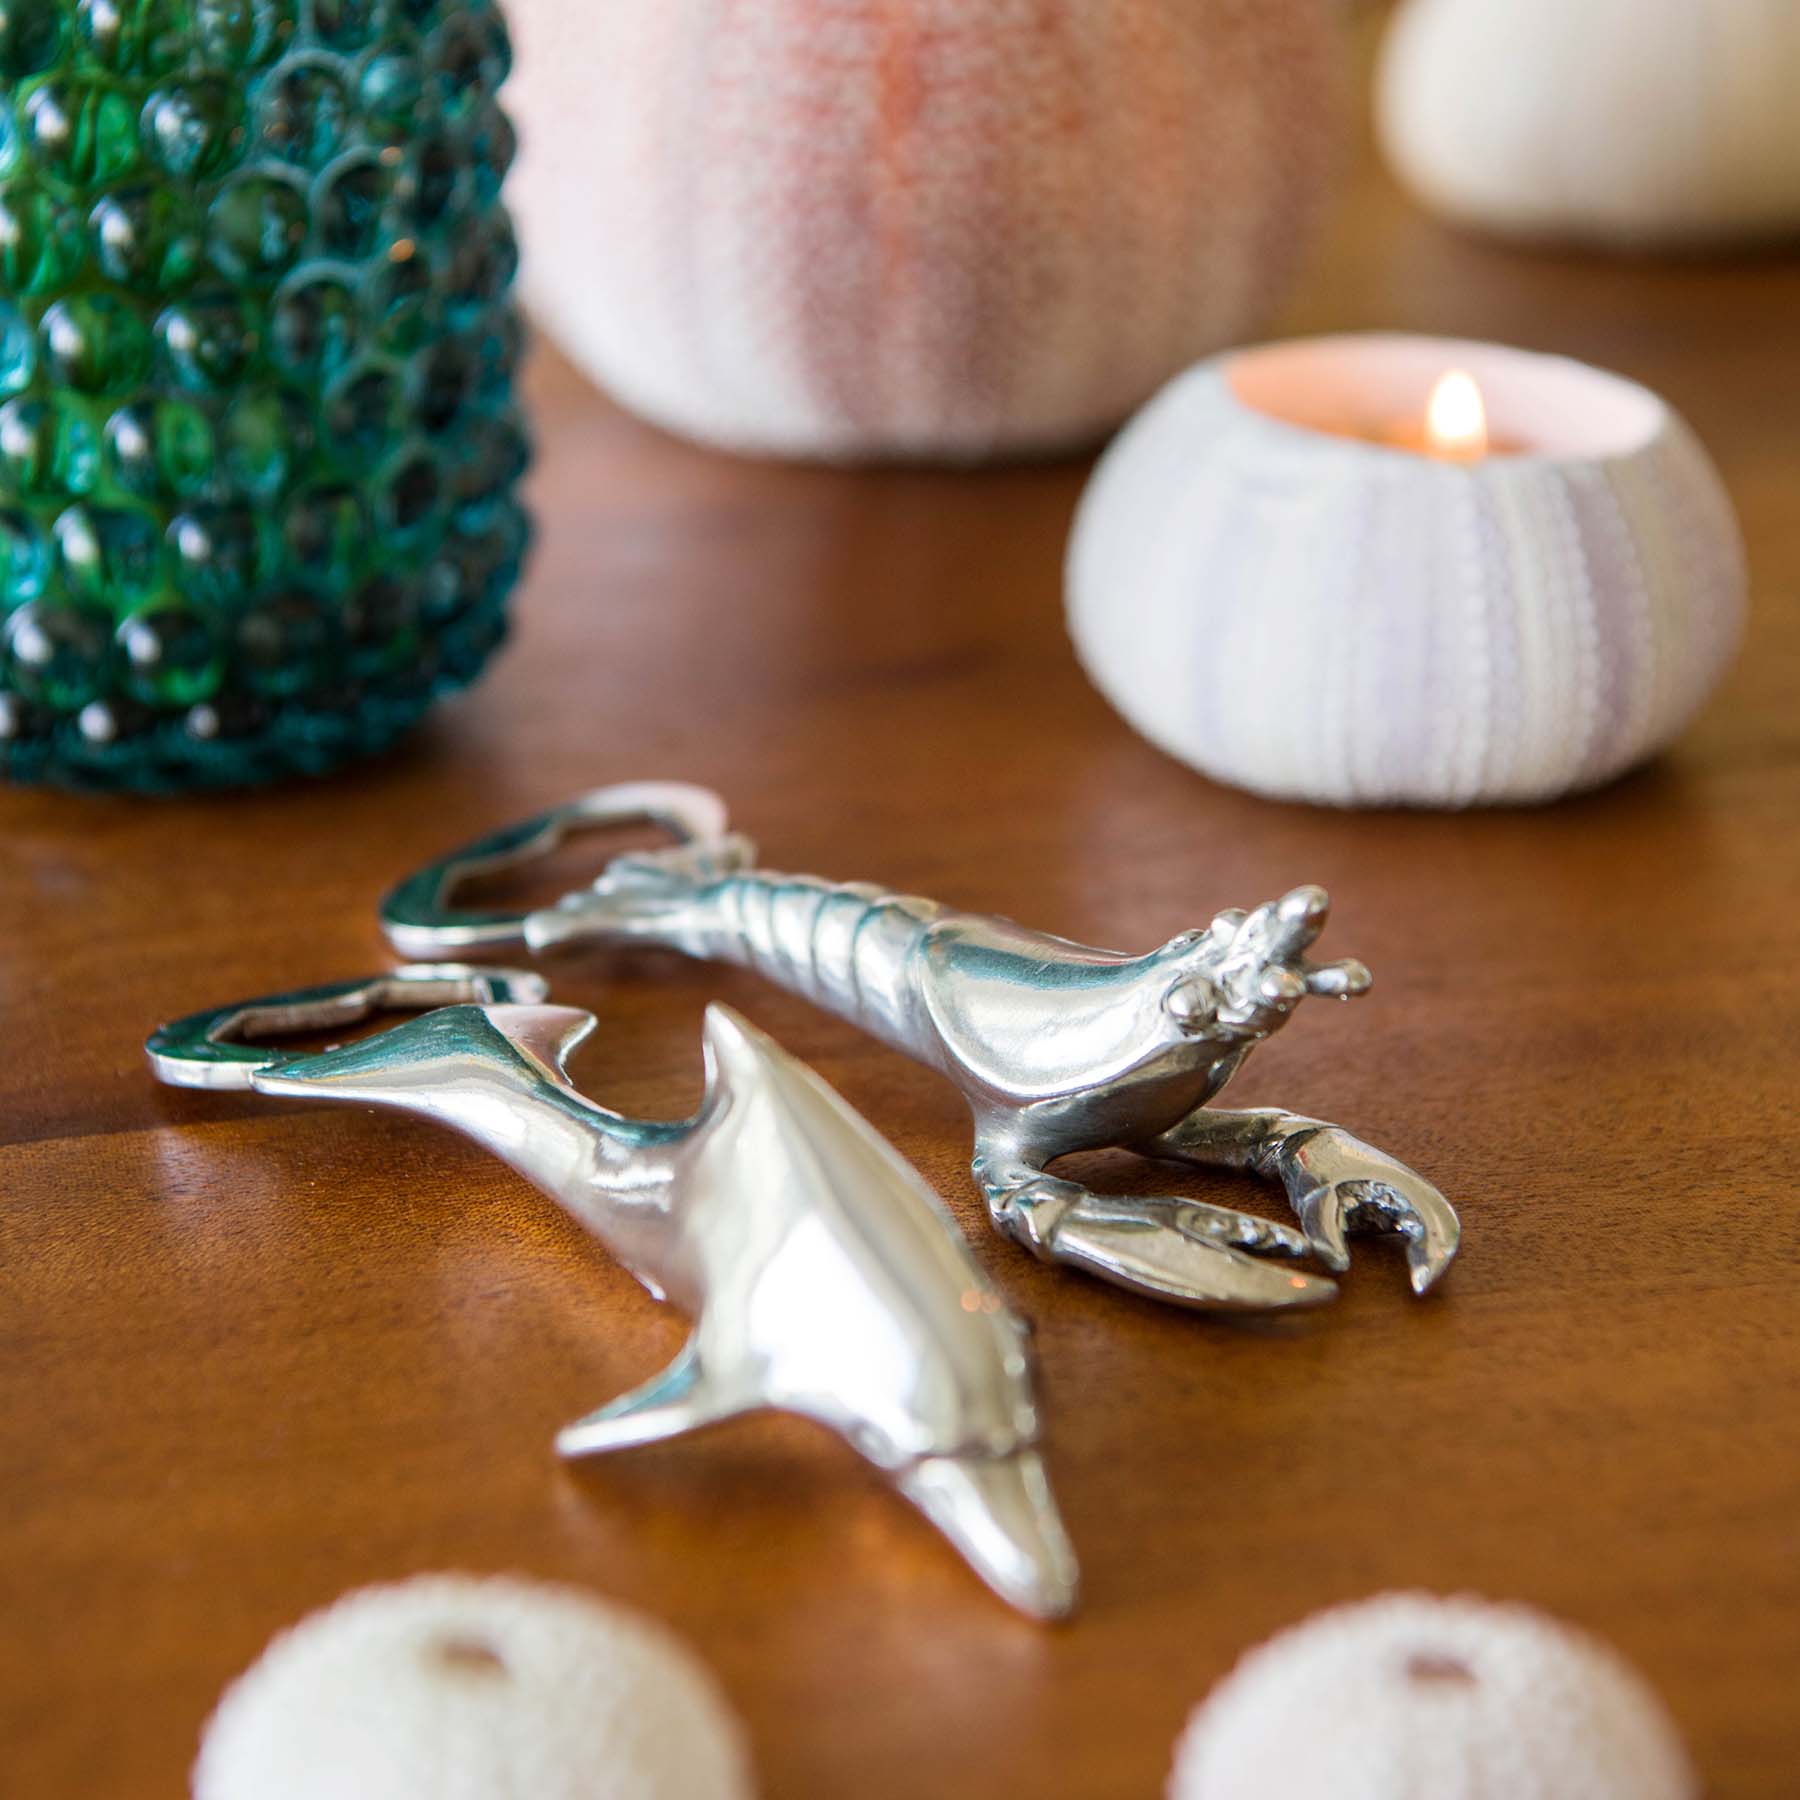 Pewter Dolphin and a Lobster shaped Bottle Opener placed on a table in front of a shell candle and candle holders in the background